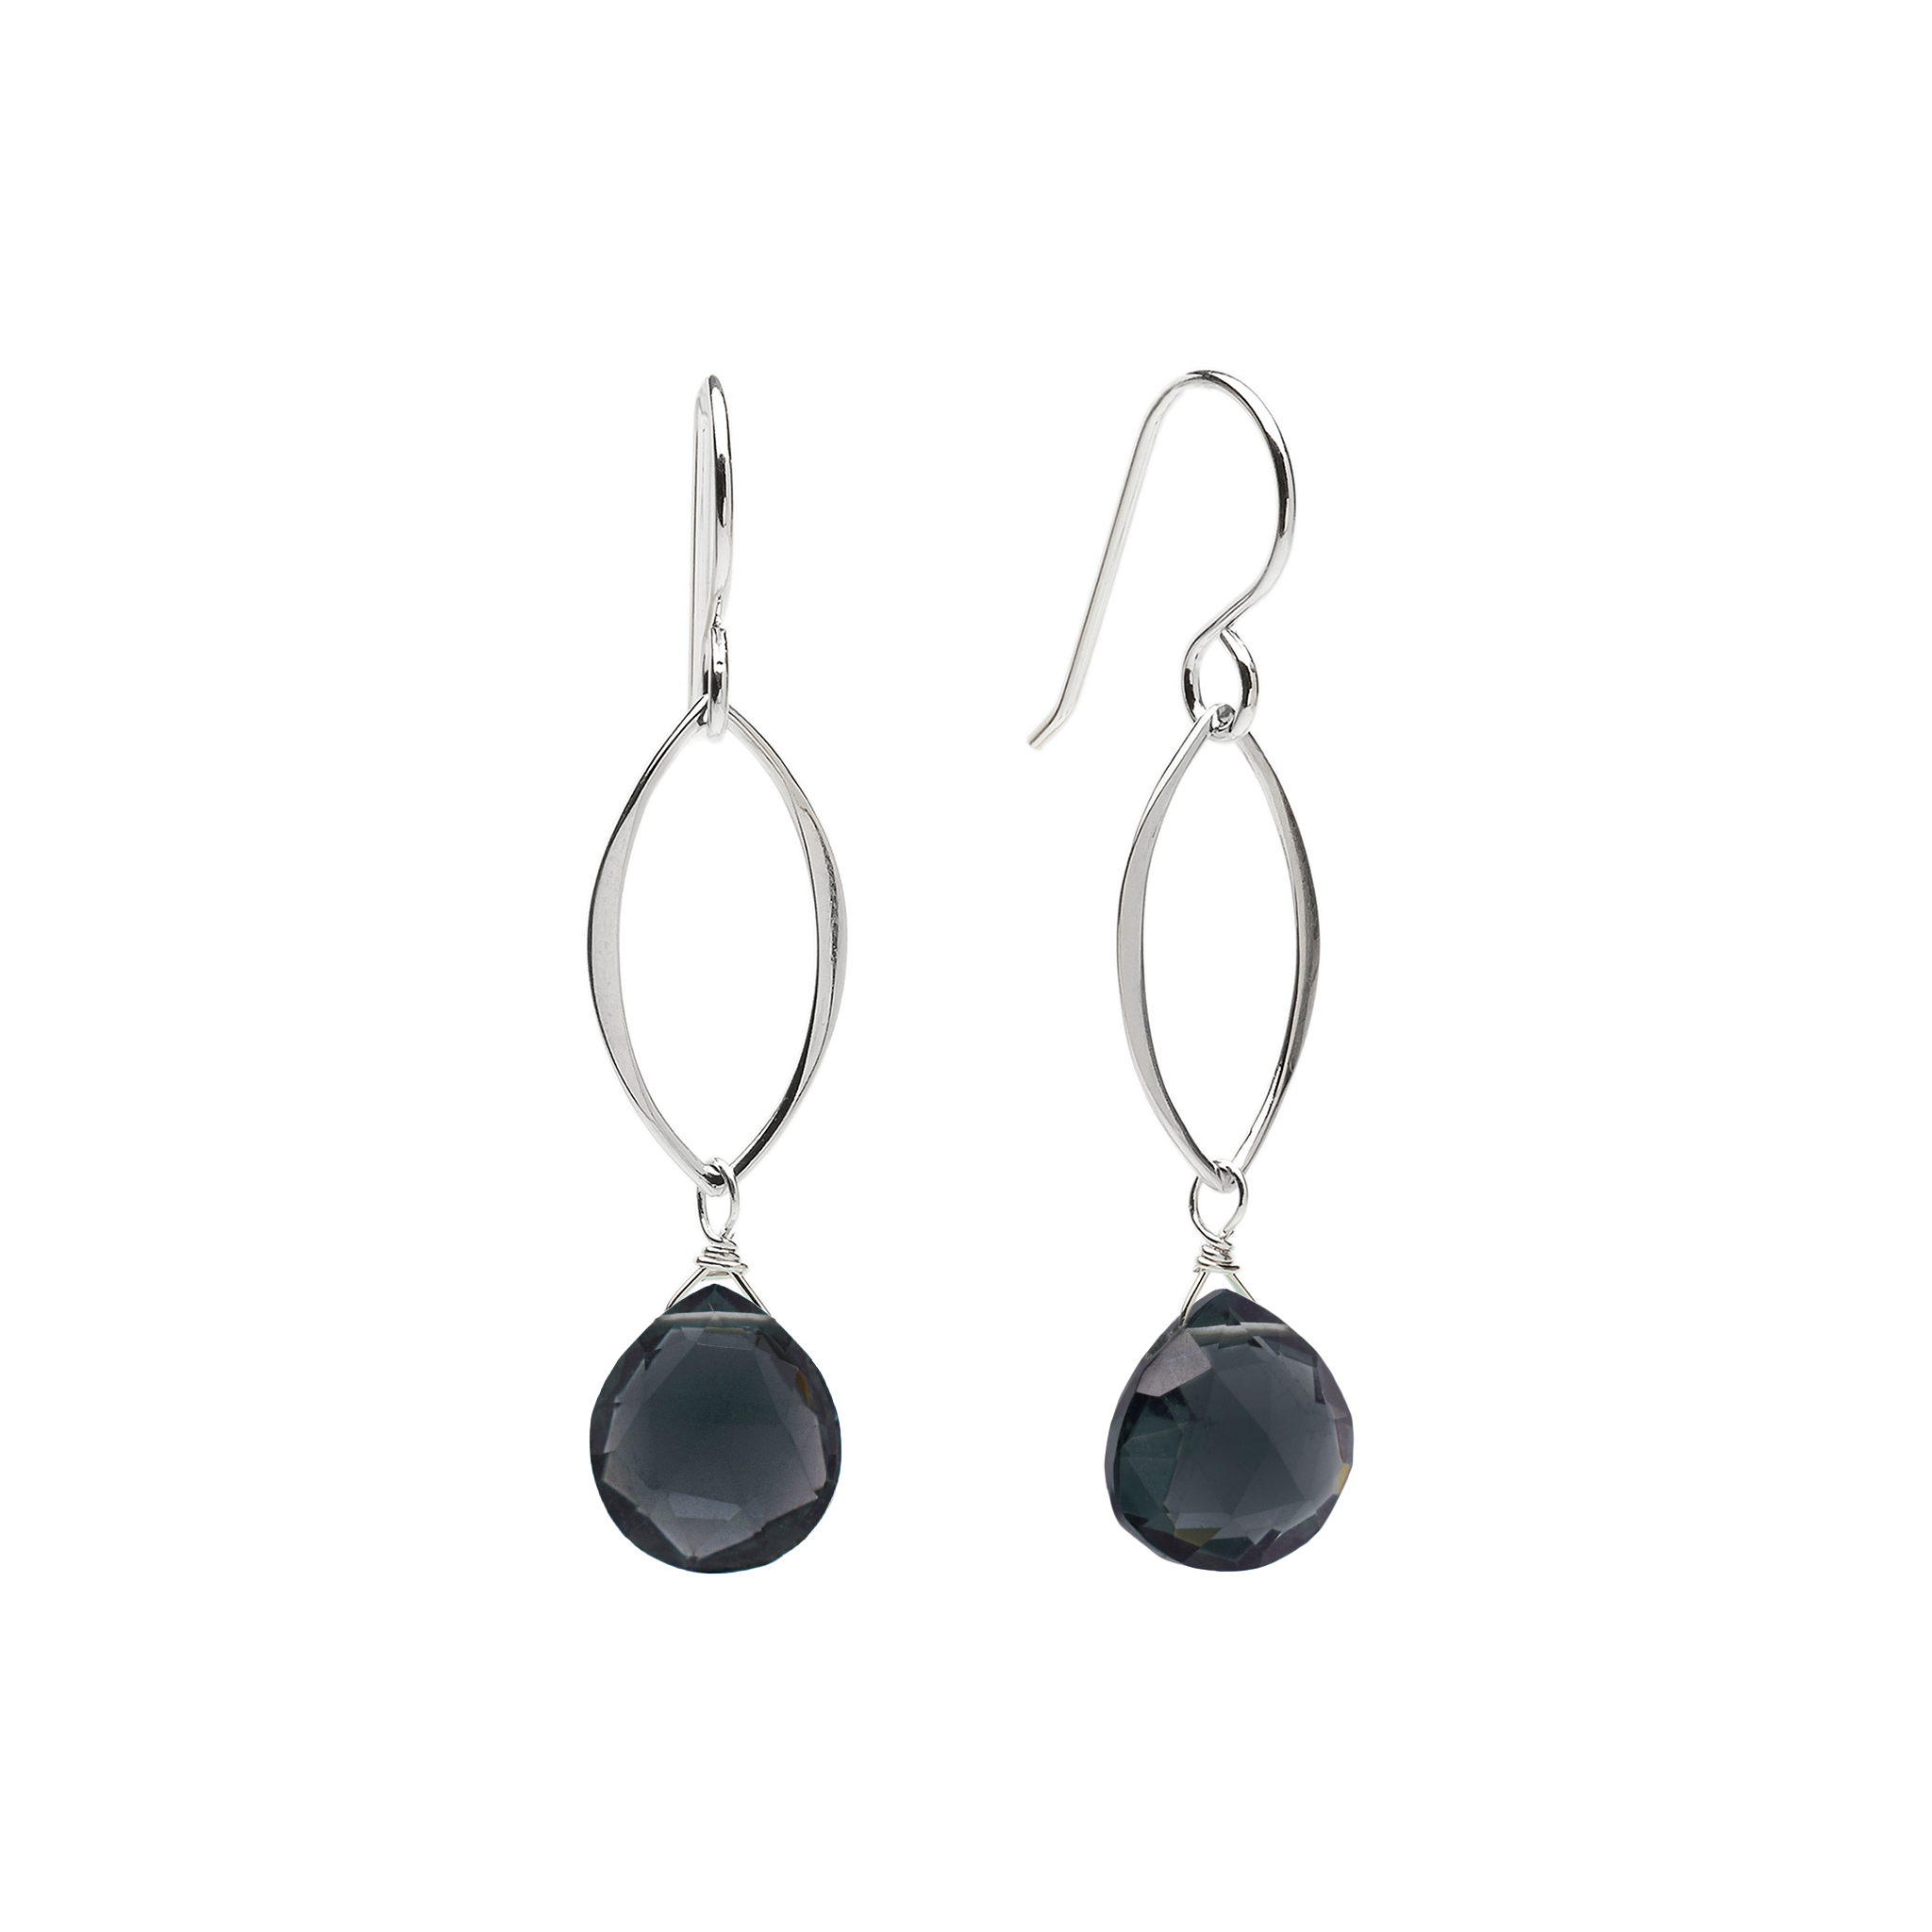 Shop the Silver Phase Earrings & enjoy FREE SHIPPING!